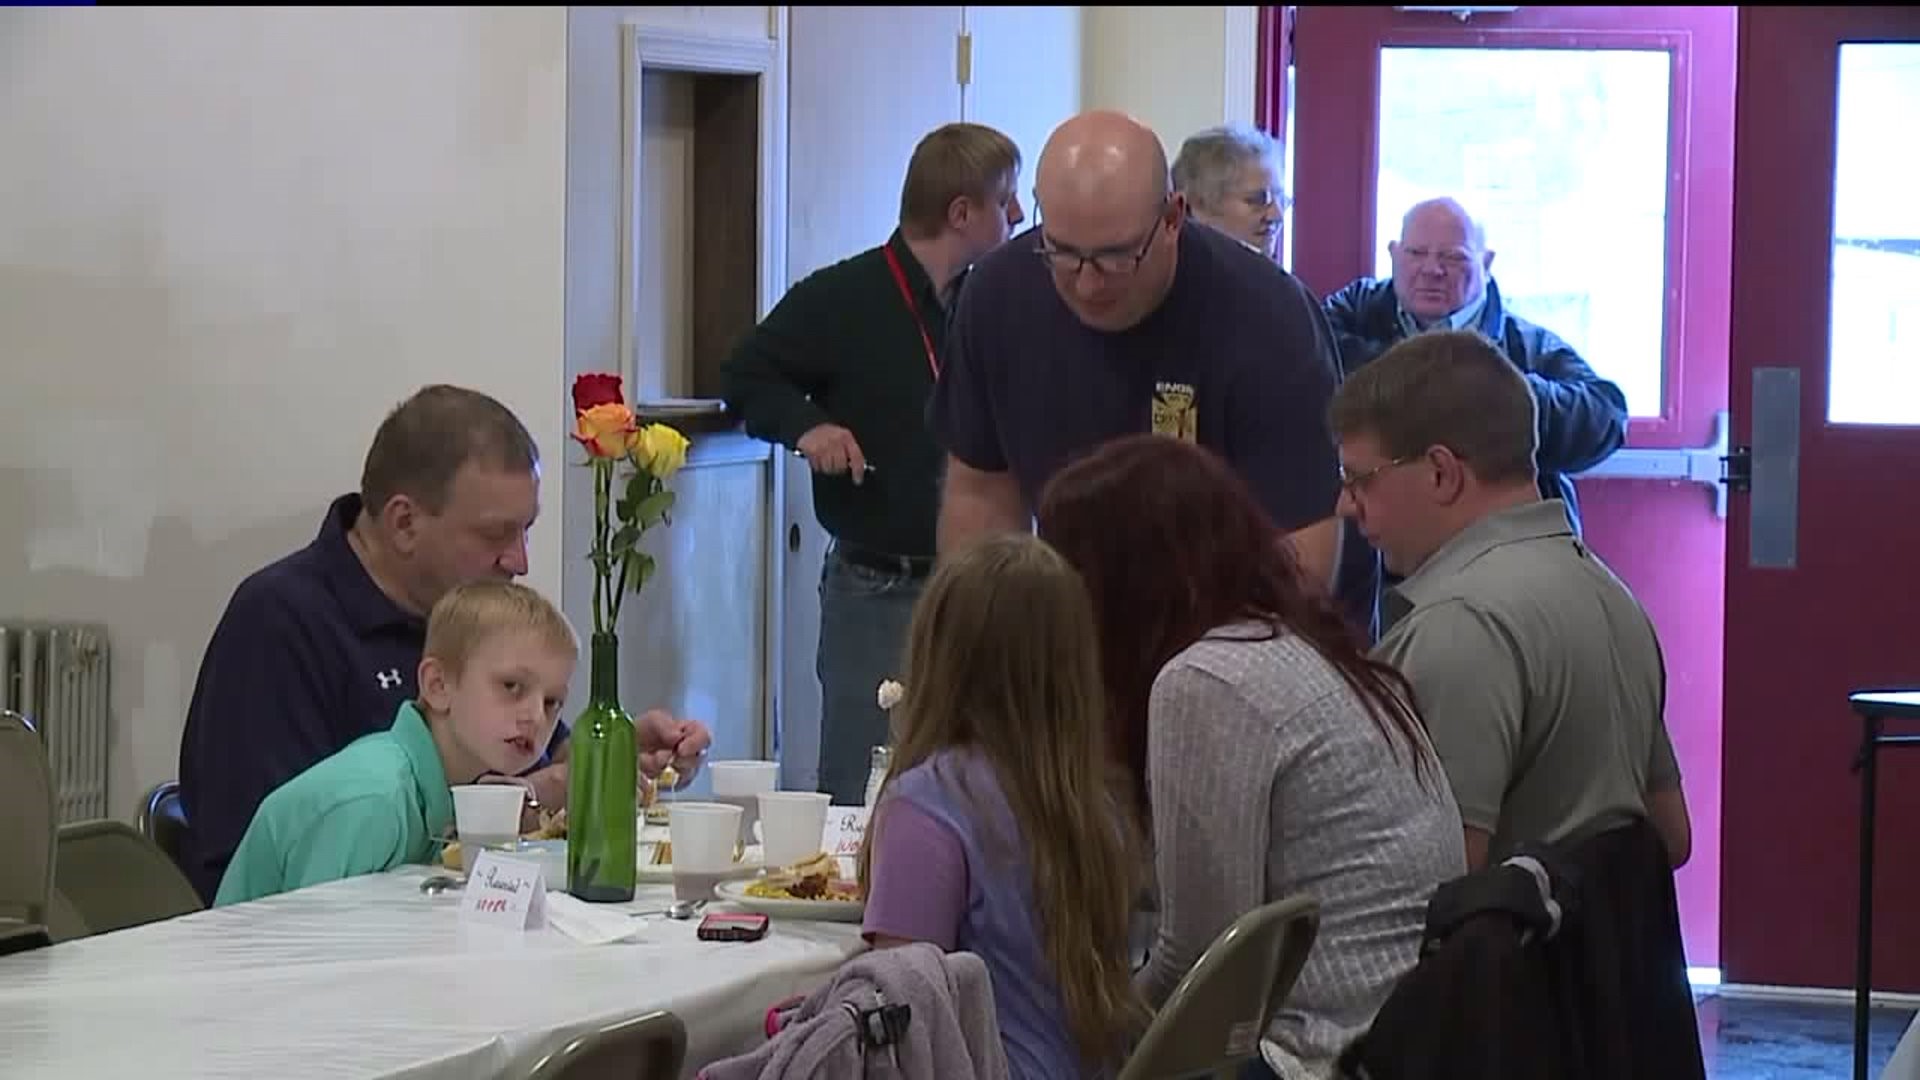 Cressona Fire Hall Offers Annual Mother`s Day Dinner to Local Mothers